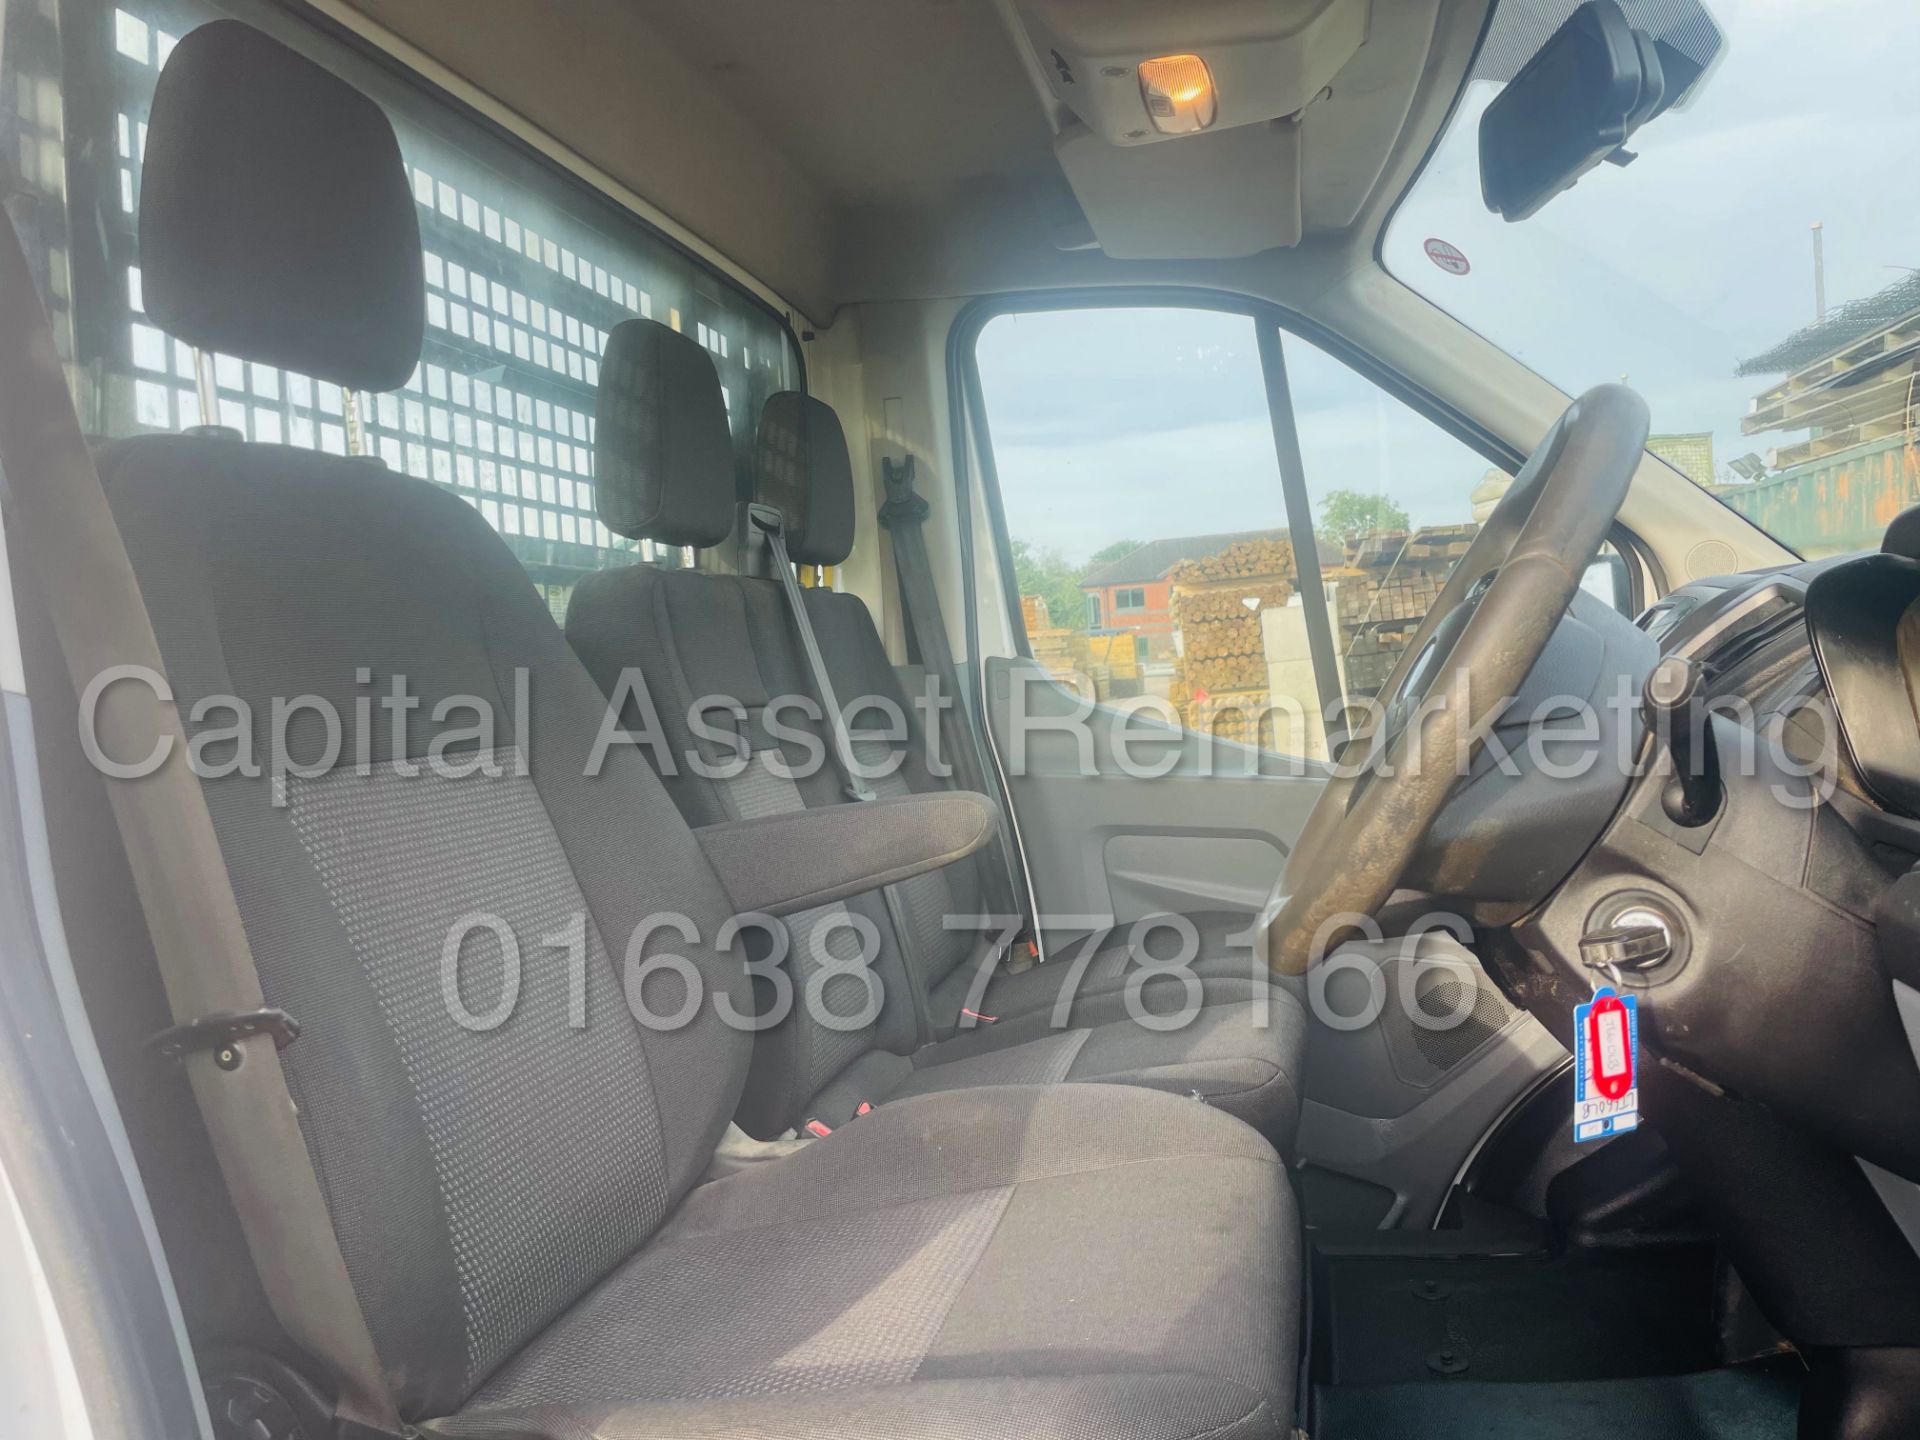 (On Sale) FORD TRANSIT 125 T350 *L4 - XLWB DROPSIDE TRUCK* (2017 - EURO 6) '2.2 TDCI - 6 SPEED' - Image 26 of 40